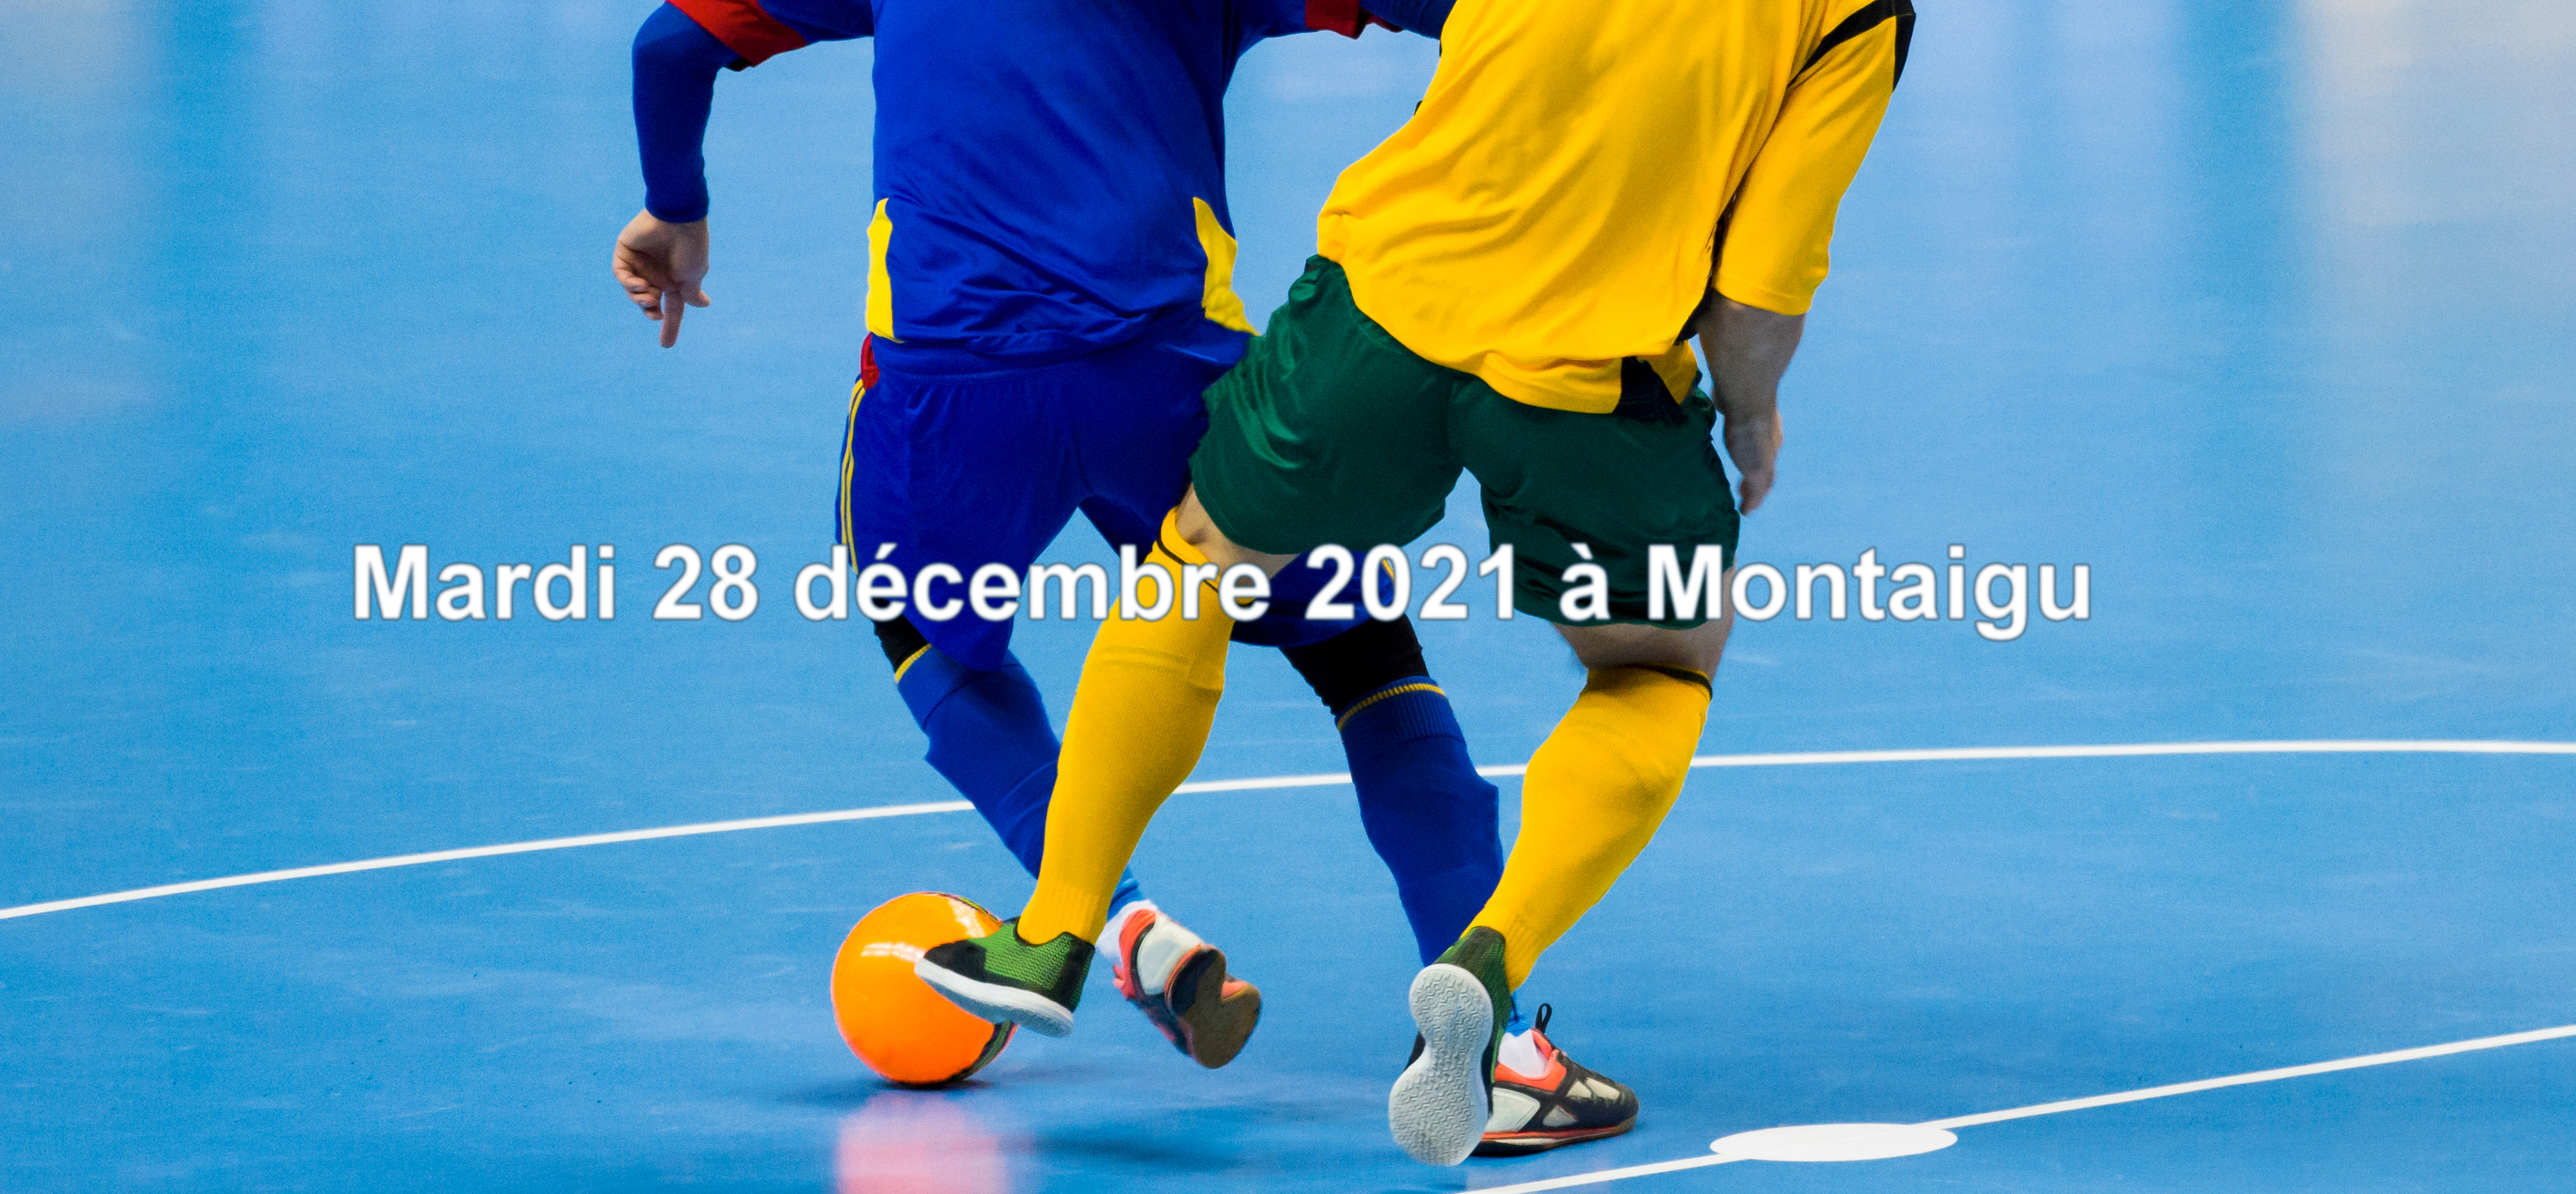 You are currently viewing Tournoi Futsal 2021 annulé